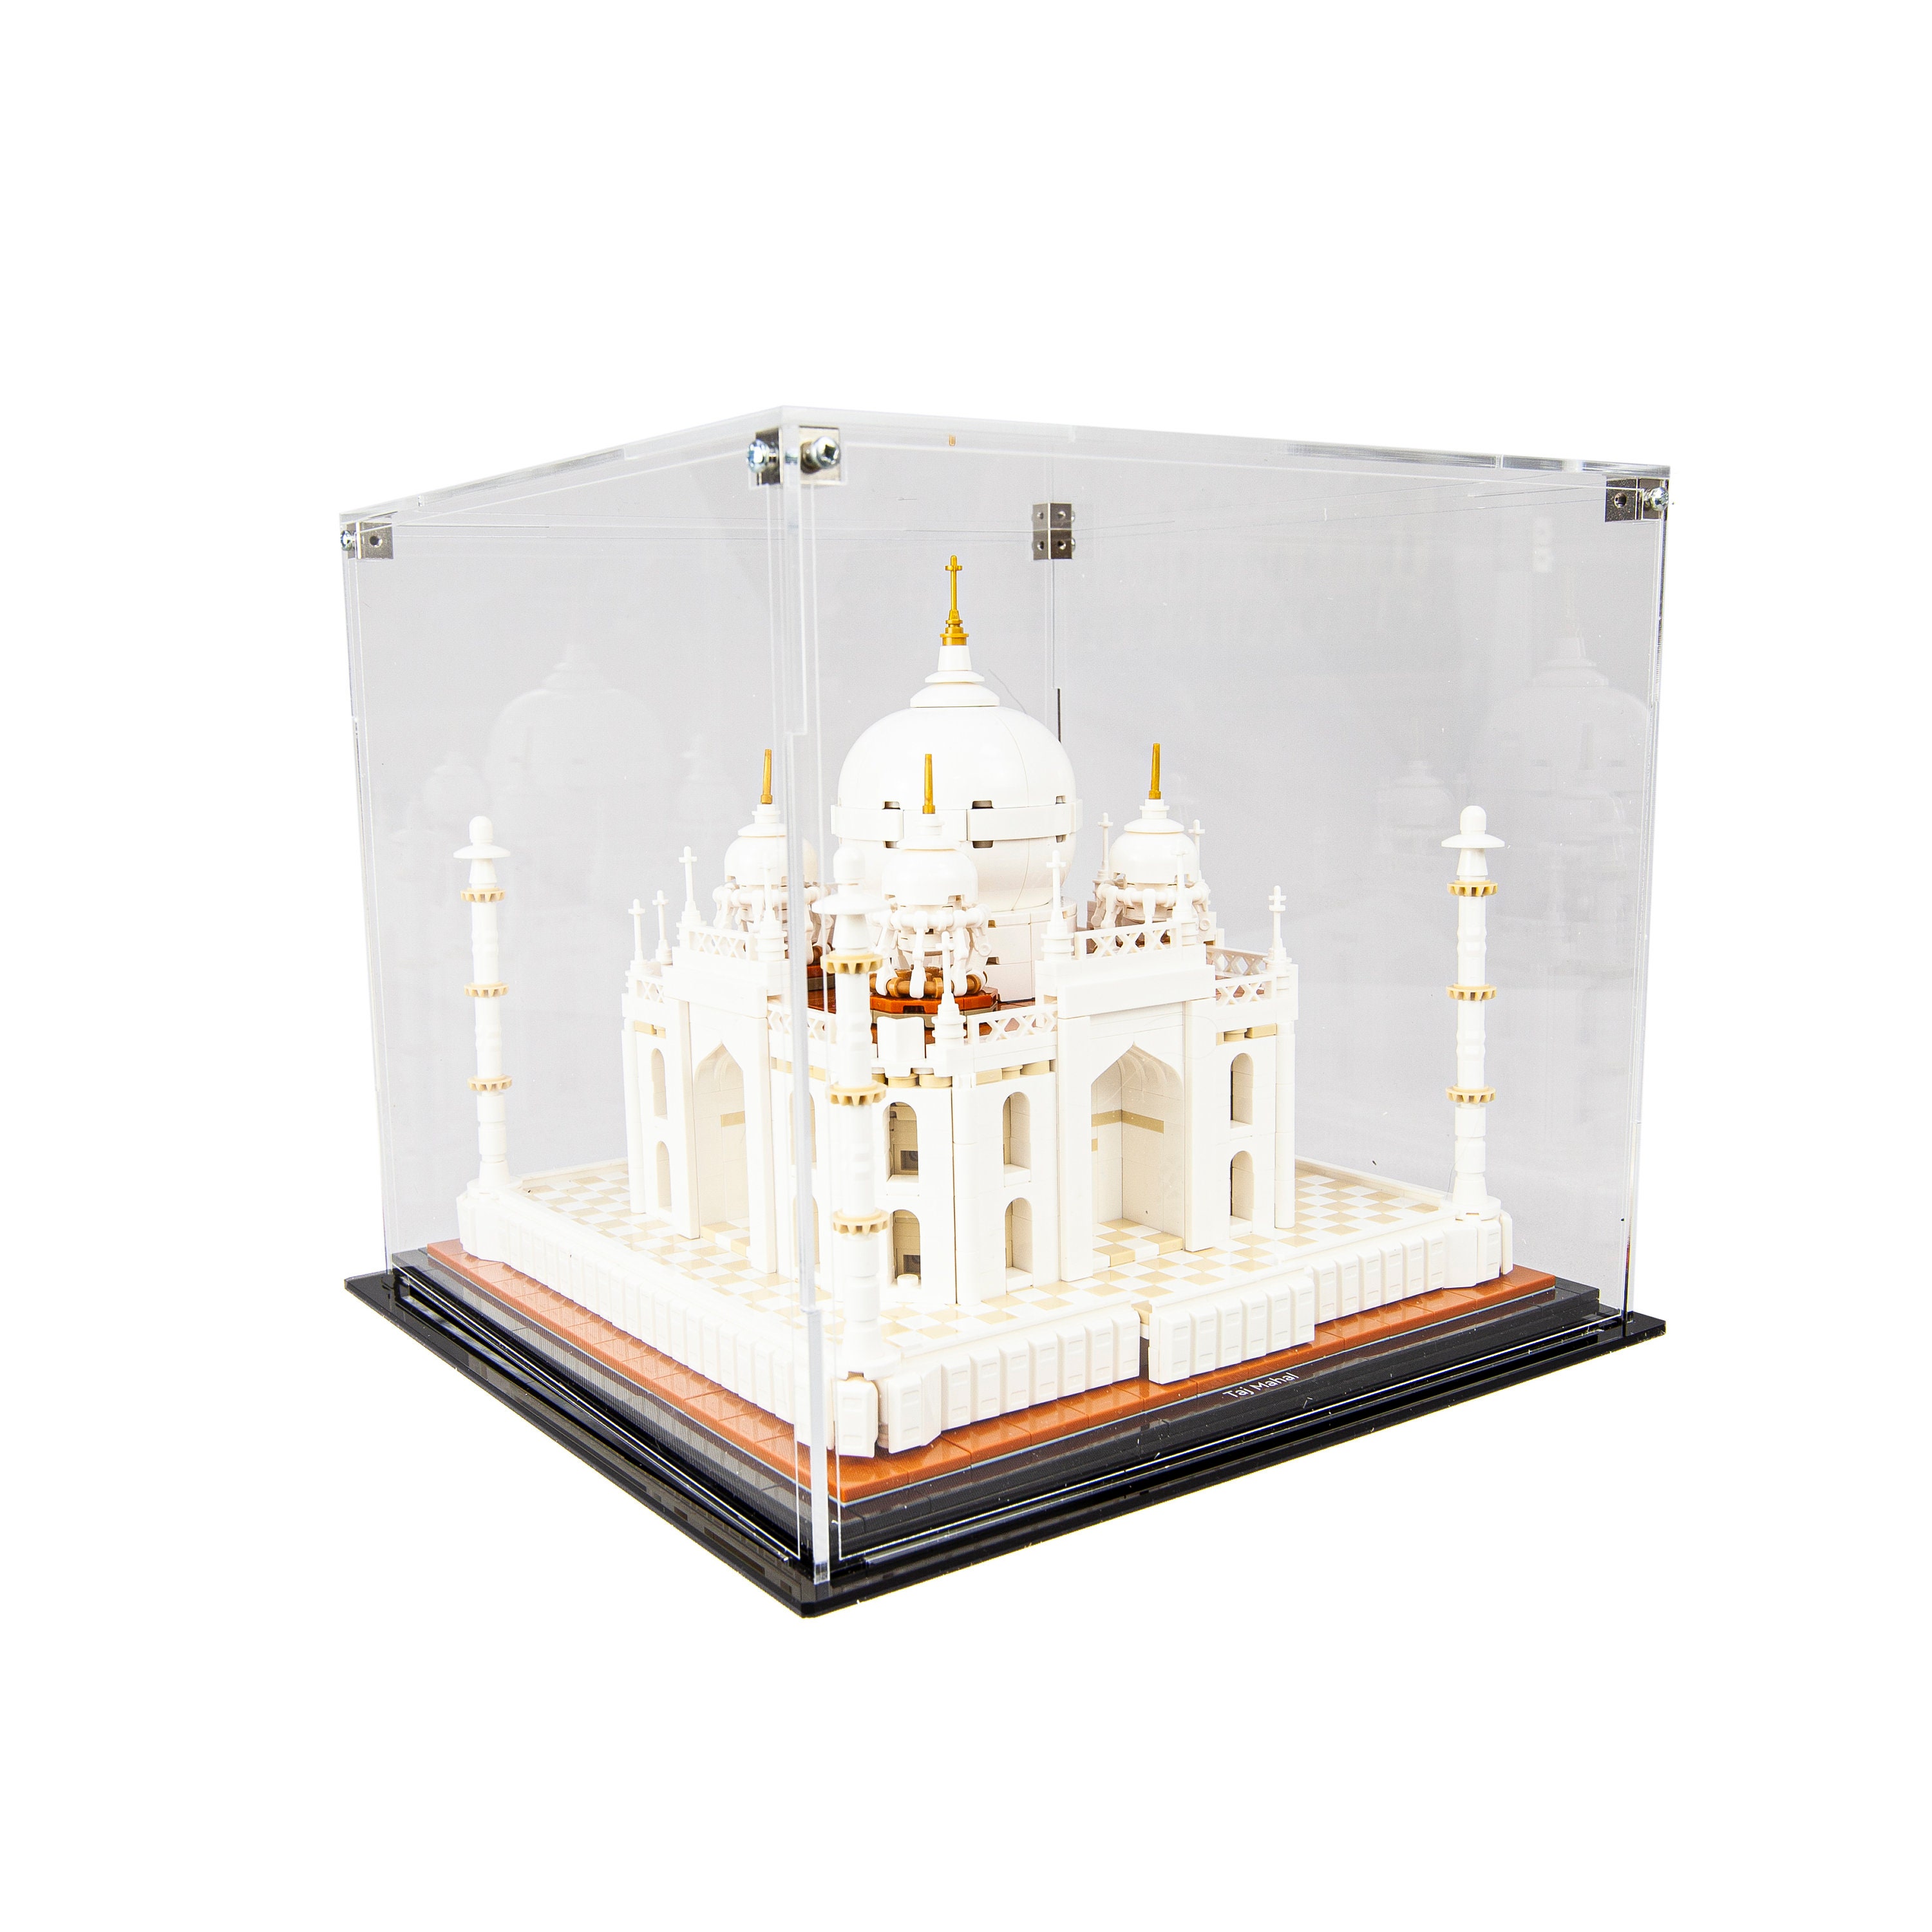  Naconmlet Acrylic Display Case for Lego Dubai 21052 - Premium  Dustproof Showcase with Mirror Trophy Base, Ideal for Action Figures and  Collections 13.8x5.9x15.7inces : Toys & Games